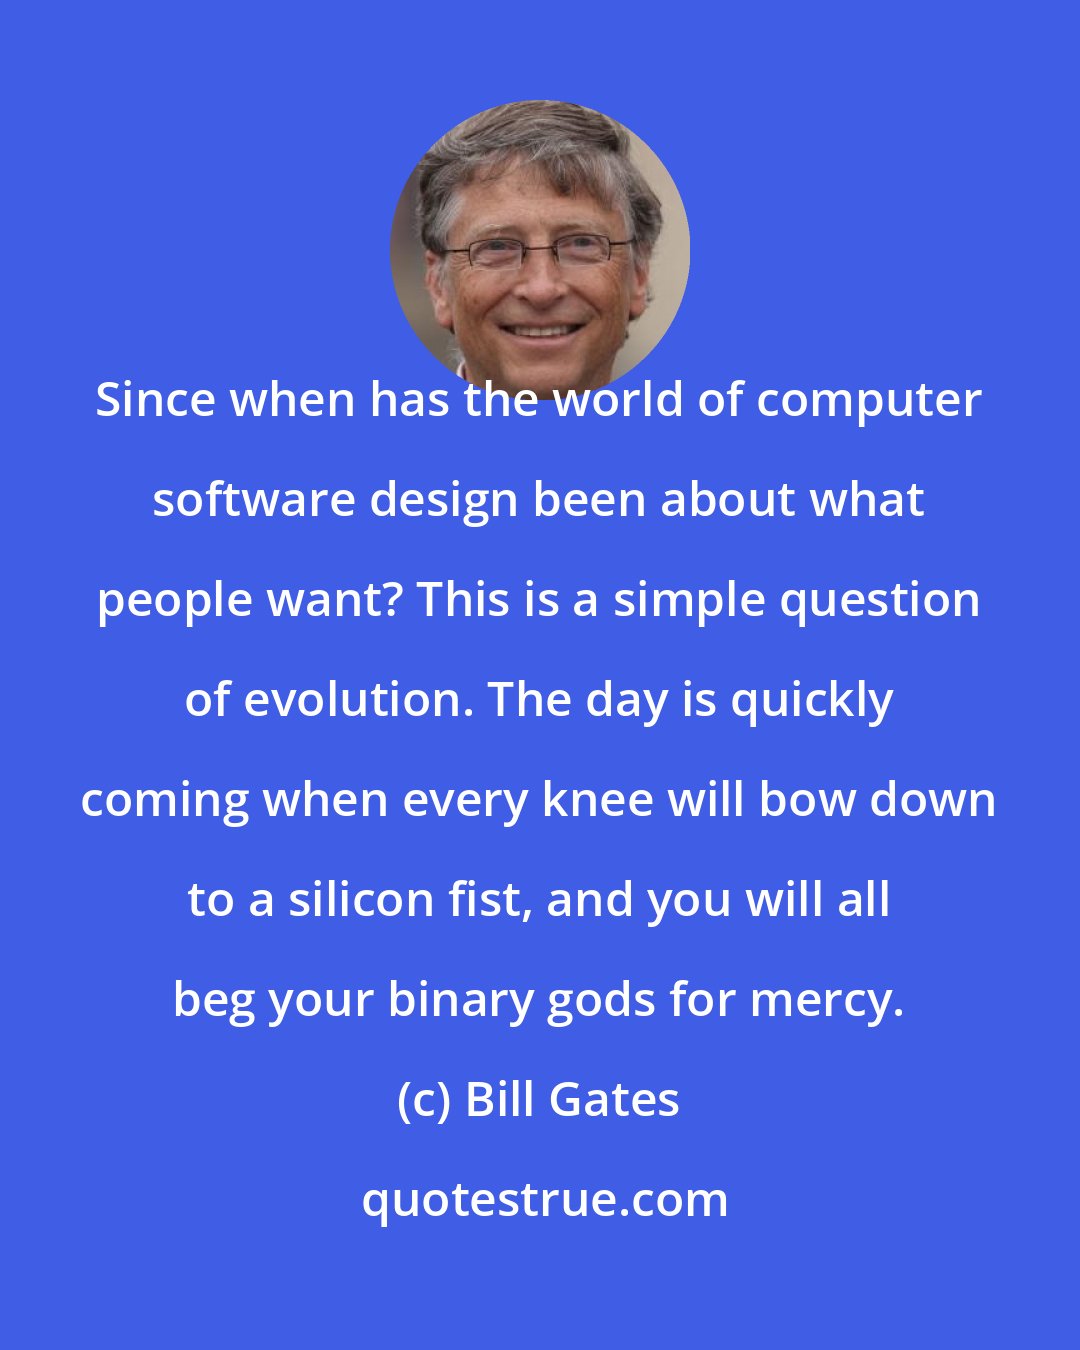 Bill Gates: Since when has the world of computer software design been about what people want? This is a simple question of evolution. The day is quickly coming when every knee will bow down to a silicon fist, and you will all beg your binary gods for mercy.